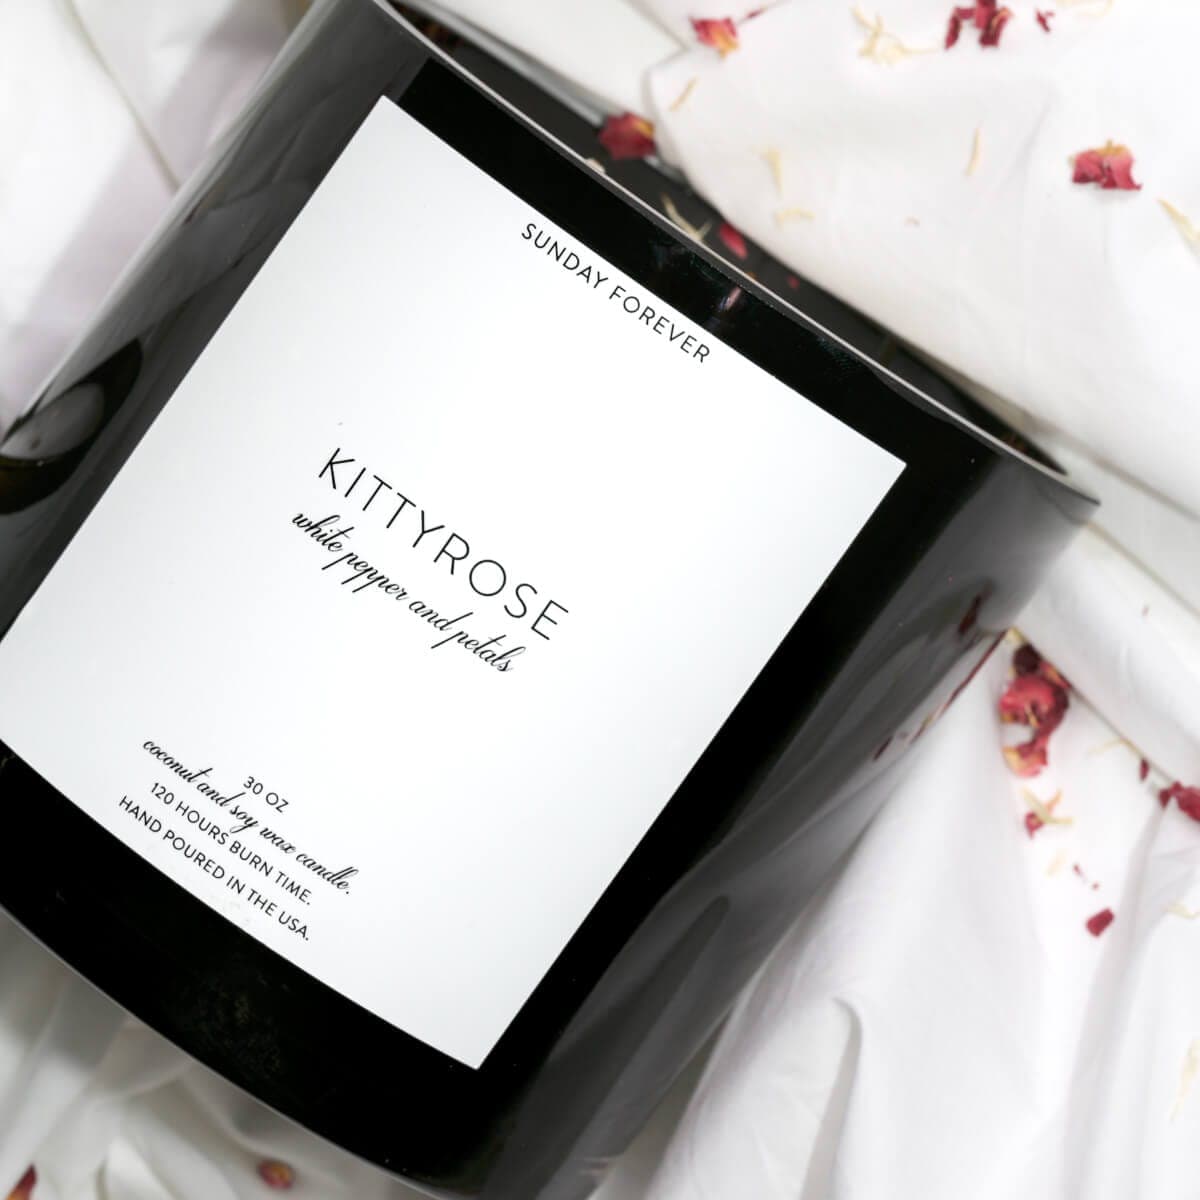 Kittyrose Luxury Candle with White Pepper and Rose - Candles-Sunday Forever